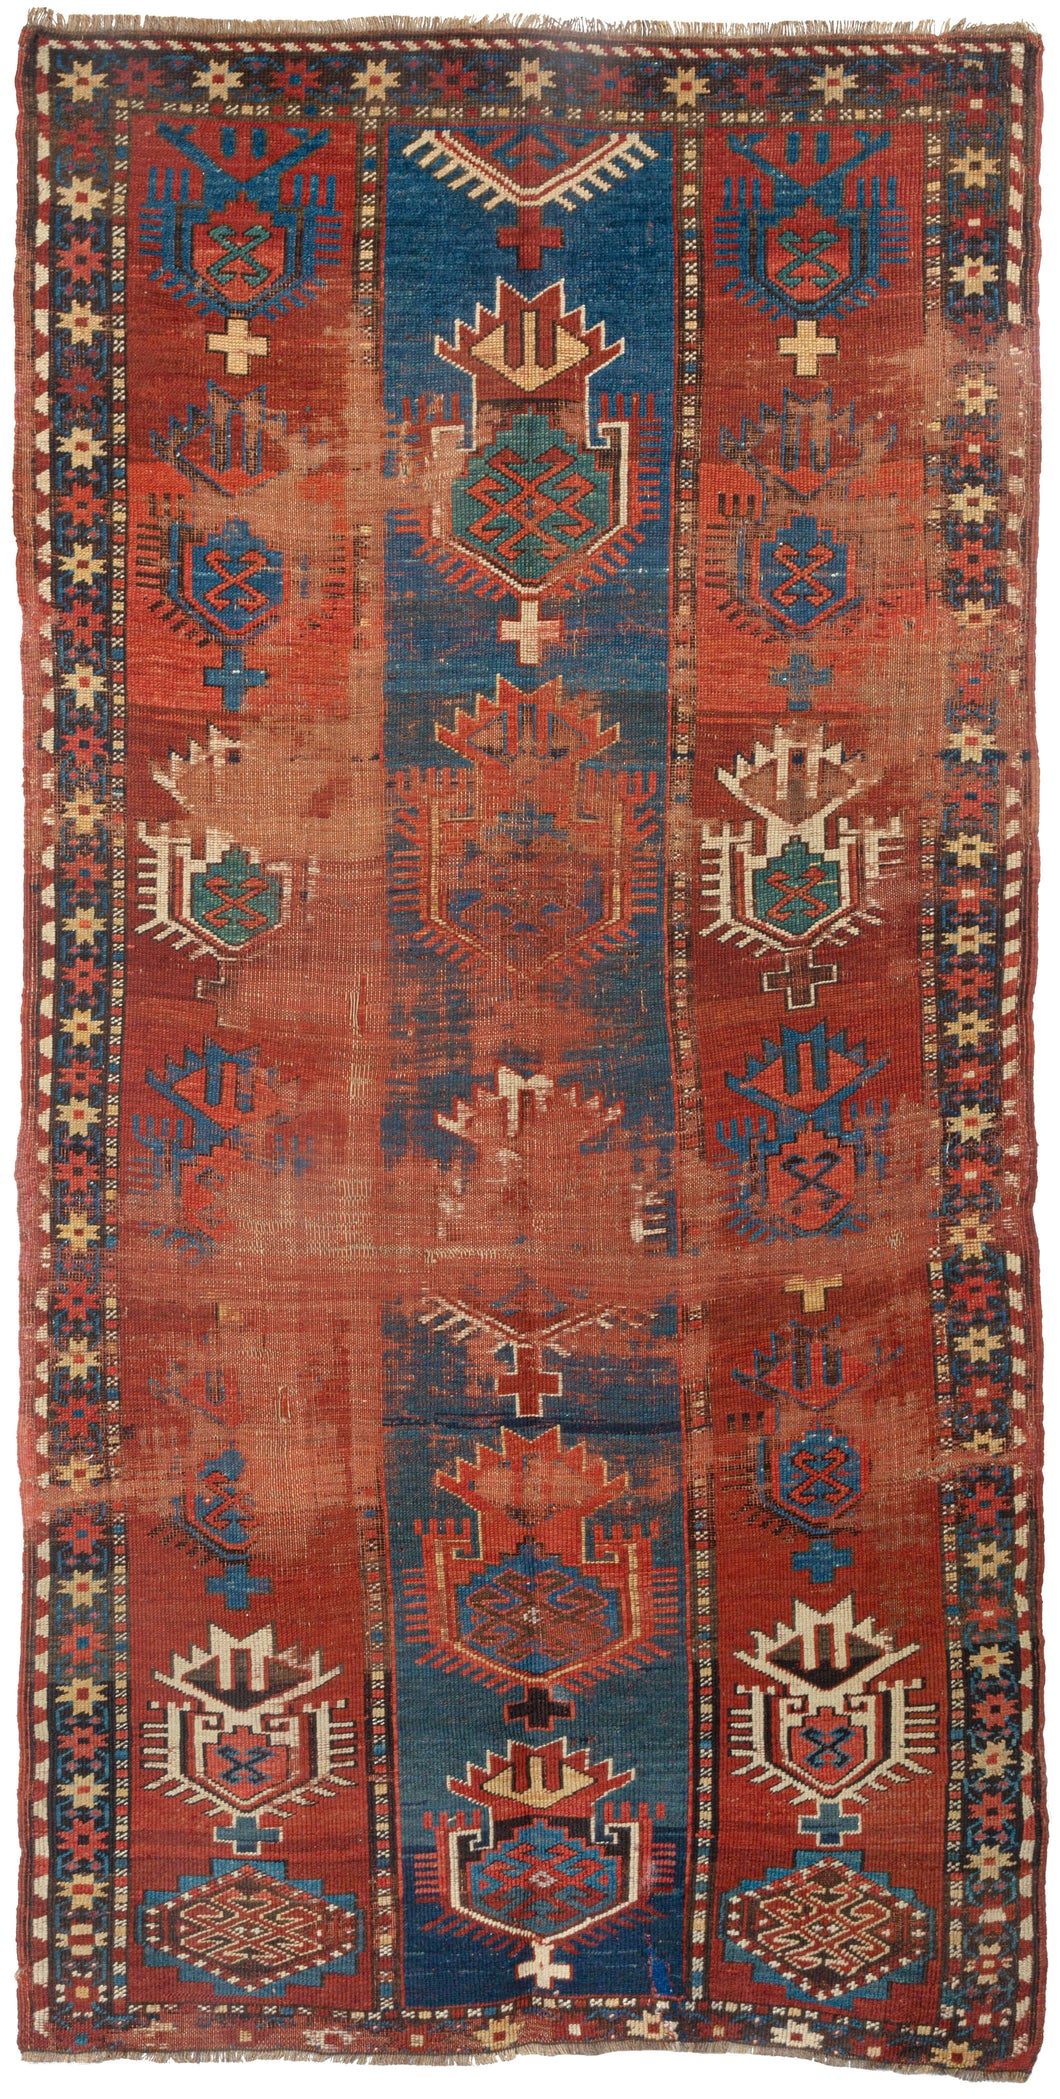 Caucasian rug handwoven in the mid-19th century. Rare design with a red weft. Likely a production of the Kurmanji Kurds. This rug displays signs of wear consistent with its age, as pictured, but the edges have been recently reinforced. 